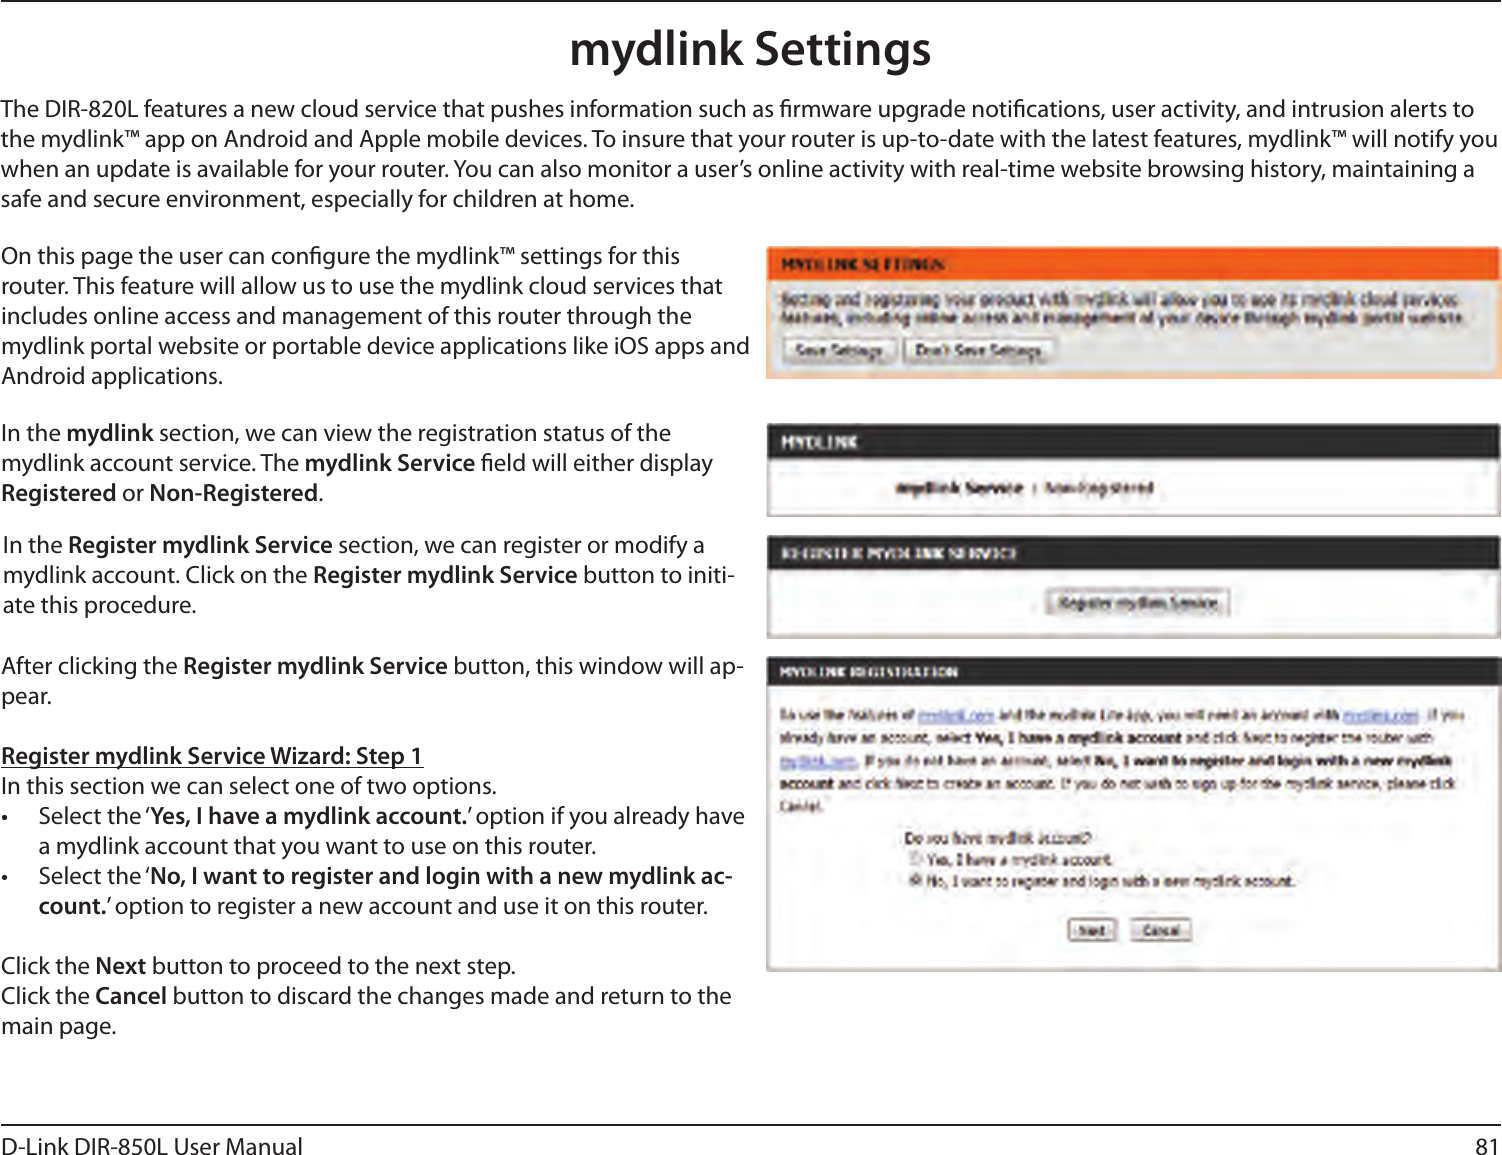 81D-Link DIR-850L User Manualmydlink SettingsOn this page the user can congure the mydlink™ settings for this router. This feature will allow us to use the mydlink cloud services that includes online access and management of this router through the mydlink portal website or portable device applications like iOS apps and Android applications.In the mydlink section, we can view the registration status of the mydlink account service. The mydlink Service eld will either display Registered or Non-Registered.In the Register mydlink Service section, we can register or modify a mydlink account. Click on the Register mydlink Service button to initi-ate this procedure.After clicking the Register mydlink Service button, this window will ap-pear.Register mydlink Service Wizard: Step 1In this section we can select one of two options.•  Select the ‘Yes, I have a mydlink account.’ option if you already have a mydlink account that you want to use on this router. •  Select the ‘No, I want to register and login with a new mydlink ac-count.’ option to register a new account and use it on this router.Click the Next button to proceed to the next step. Click the Cancel button to discard the changes made and return to the main page.The DIR-820L features a new cloud service that pushes information such as rmware upgrade notications, user activity, and intrusion alerts to the mydlink™ app on Android and Apple mobile devices. To insure that your router is up-to-date with the latest features, mydlink™ will notify you when an update is available for your router. You can also monitor a user’s online activity with real-time website browsing history, maintaining a safe and secure environment, especially for children at home.